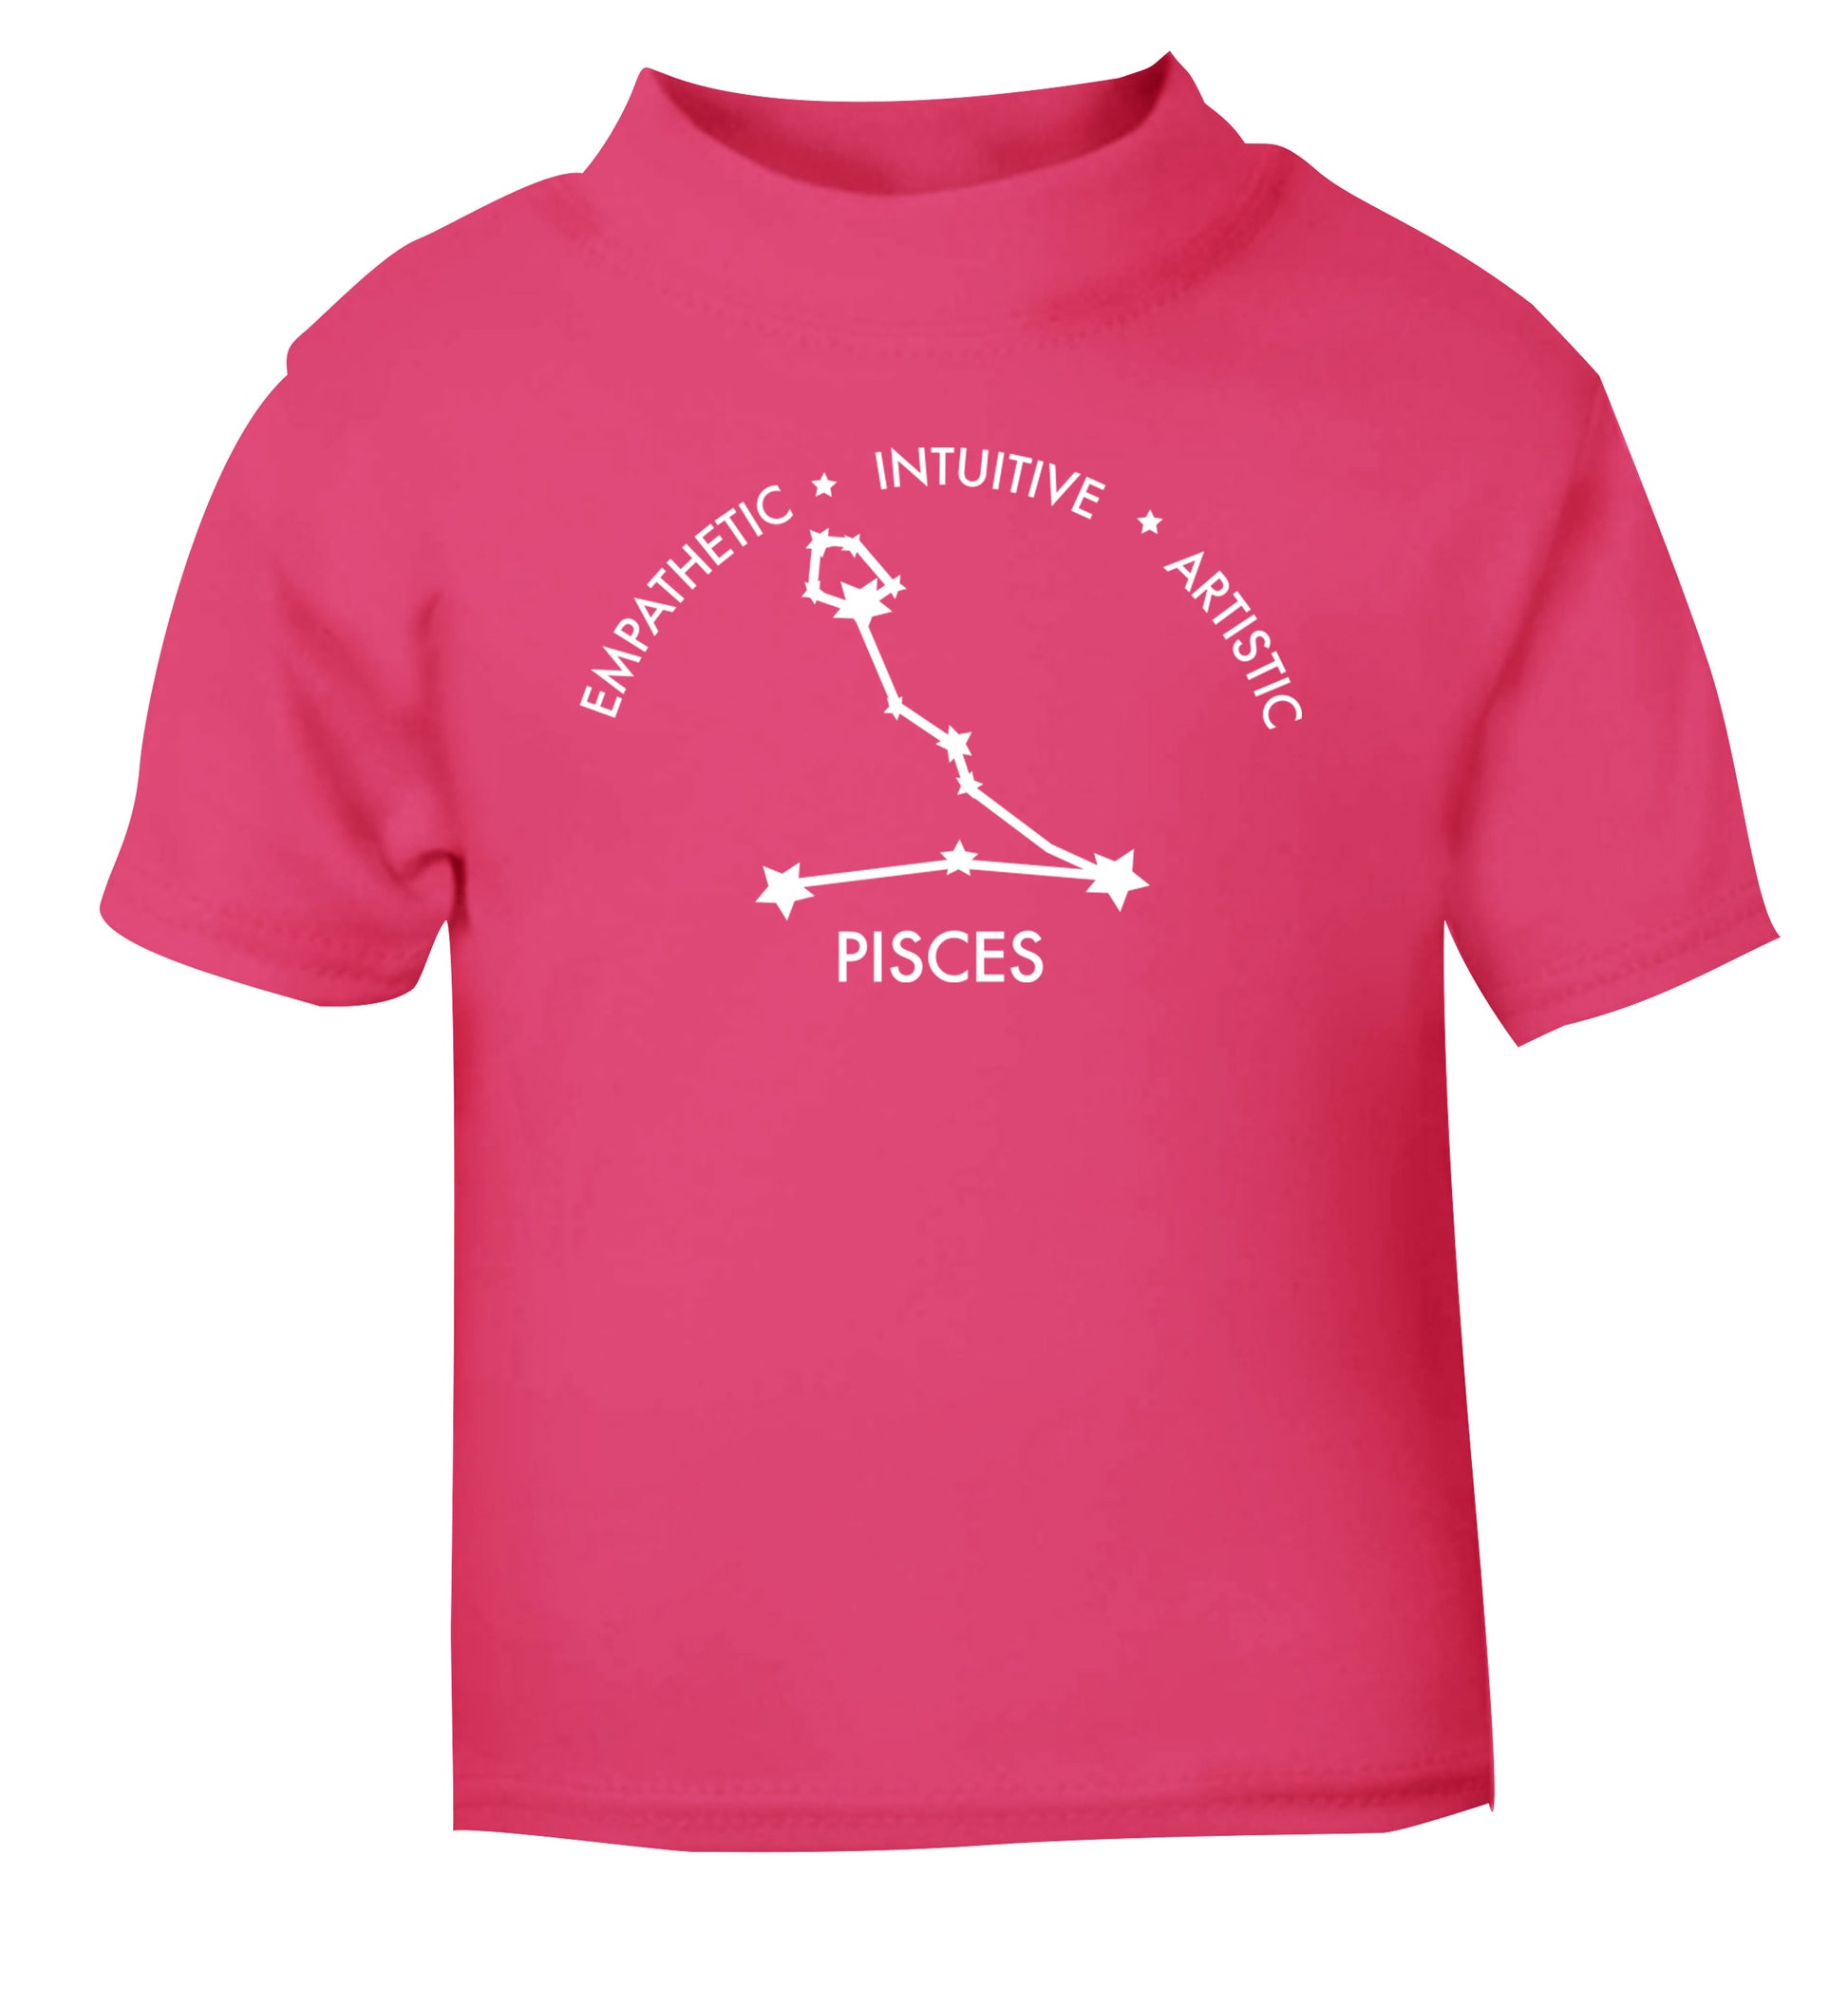 Pisces: Empathetic | Intuitive | Artistic pink Baby Toddler Tshirt 2 Years